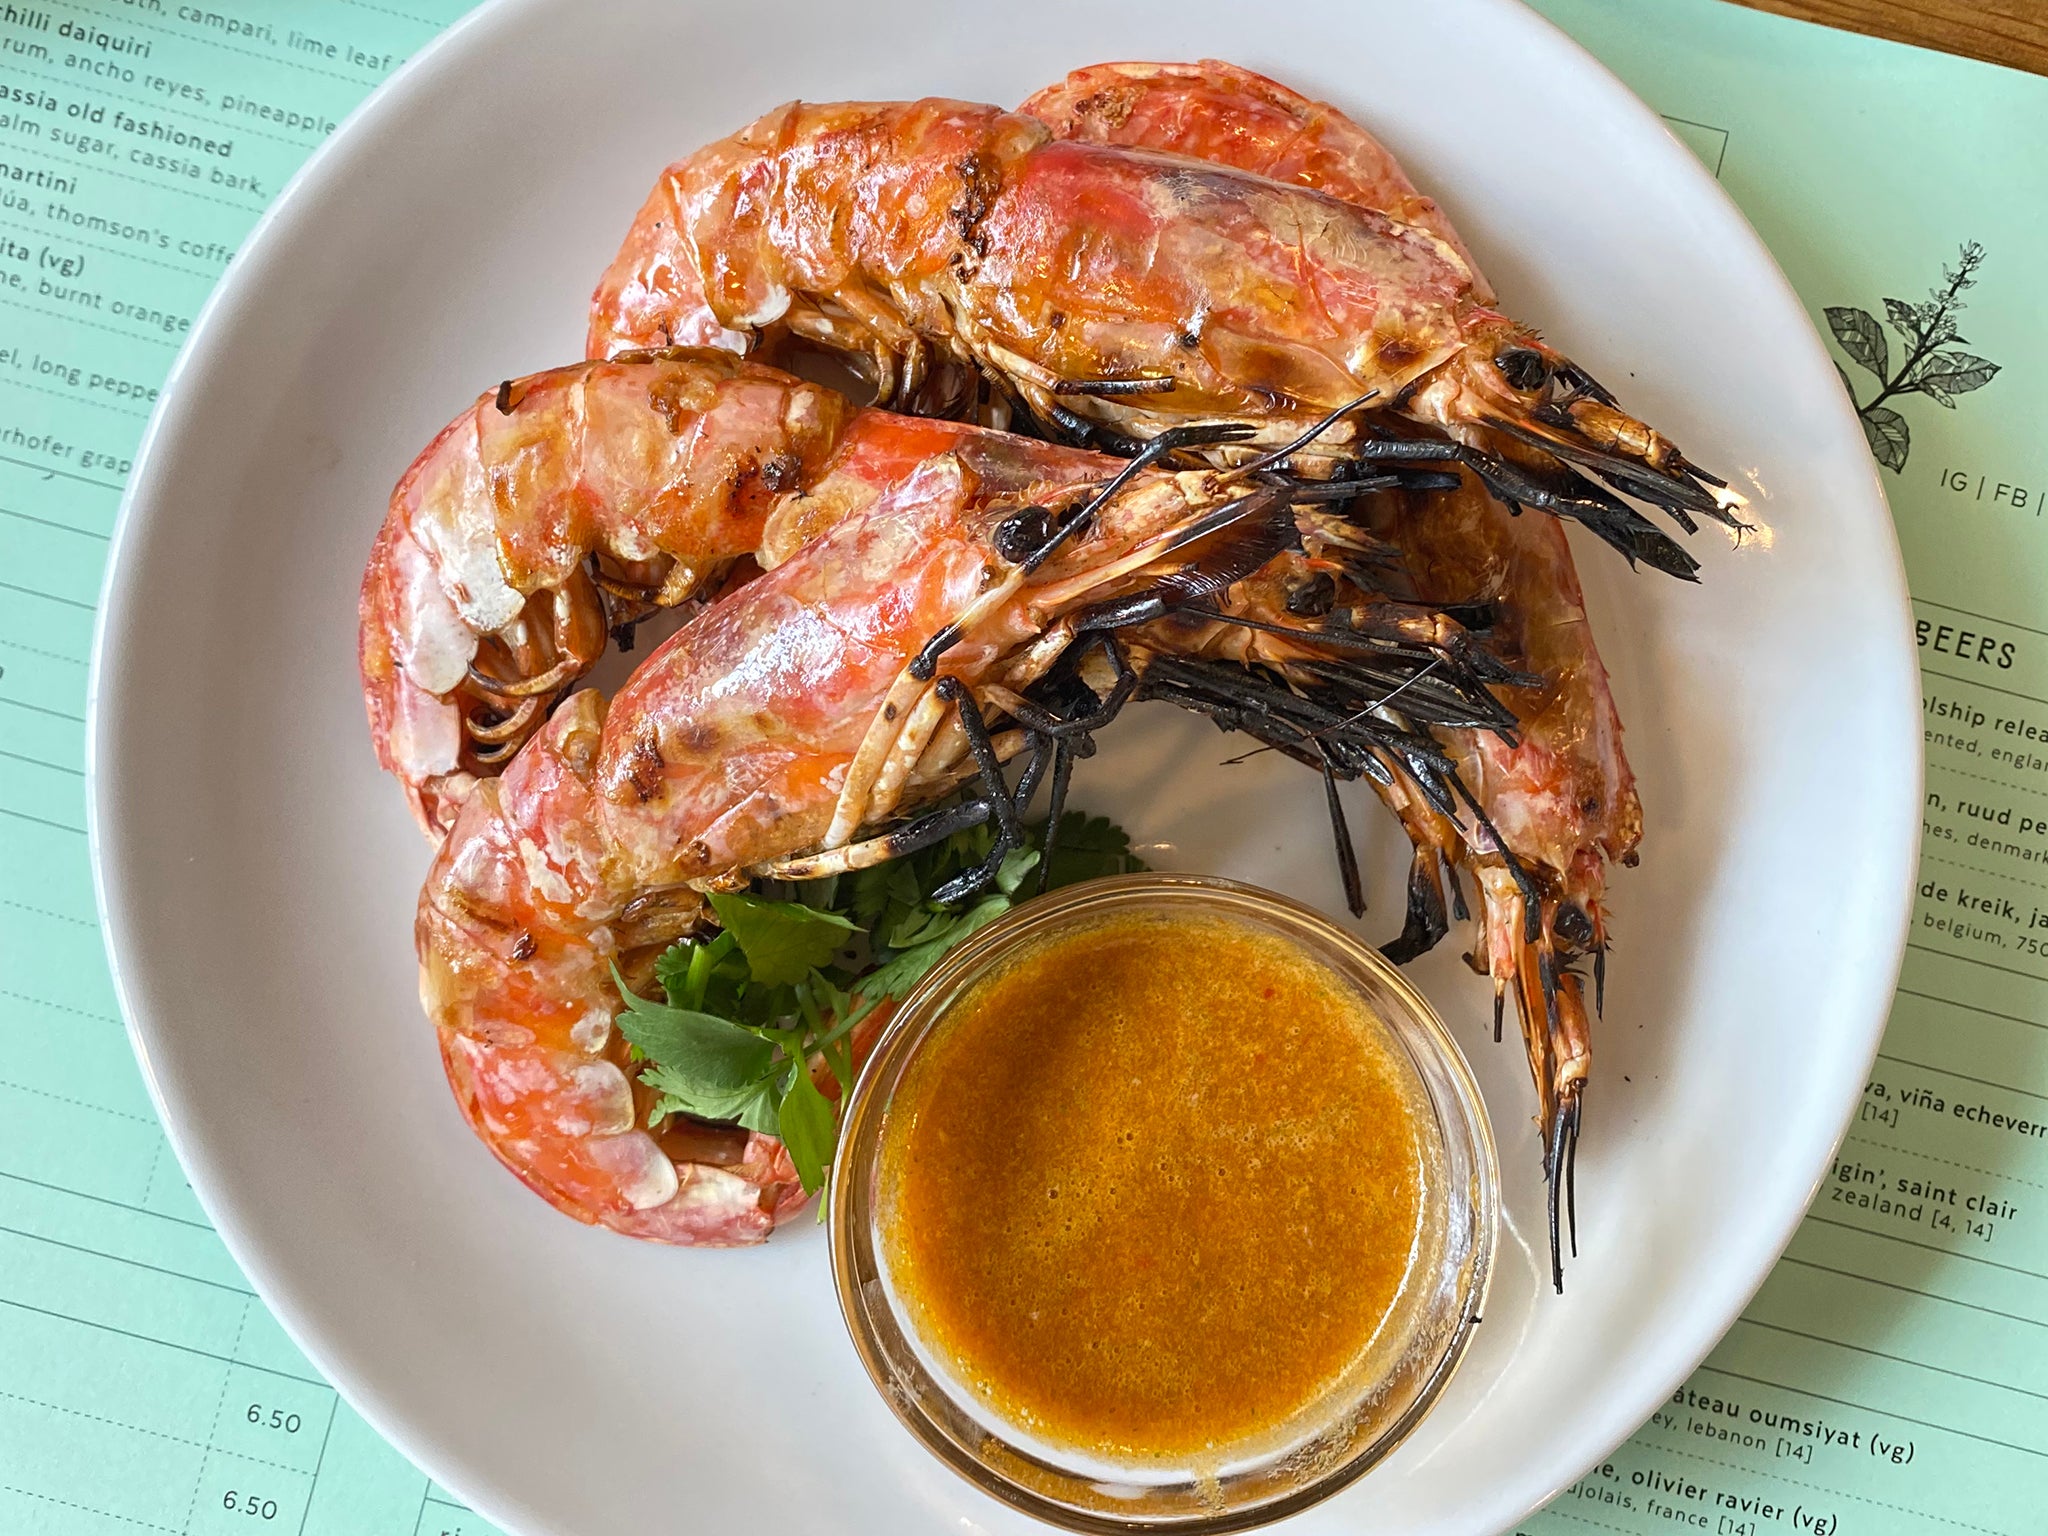 A spicy Thai dipping sauce brings the heat to these grilled prawns